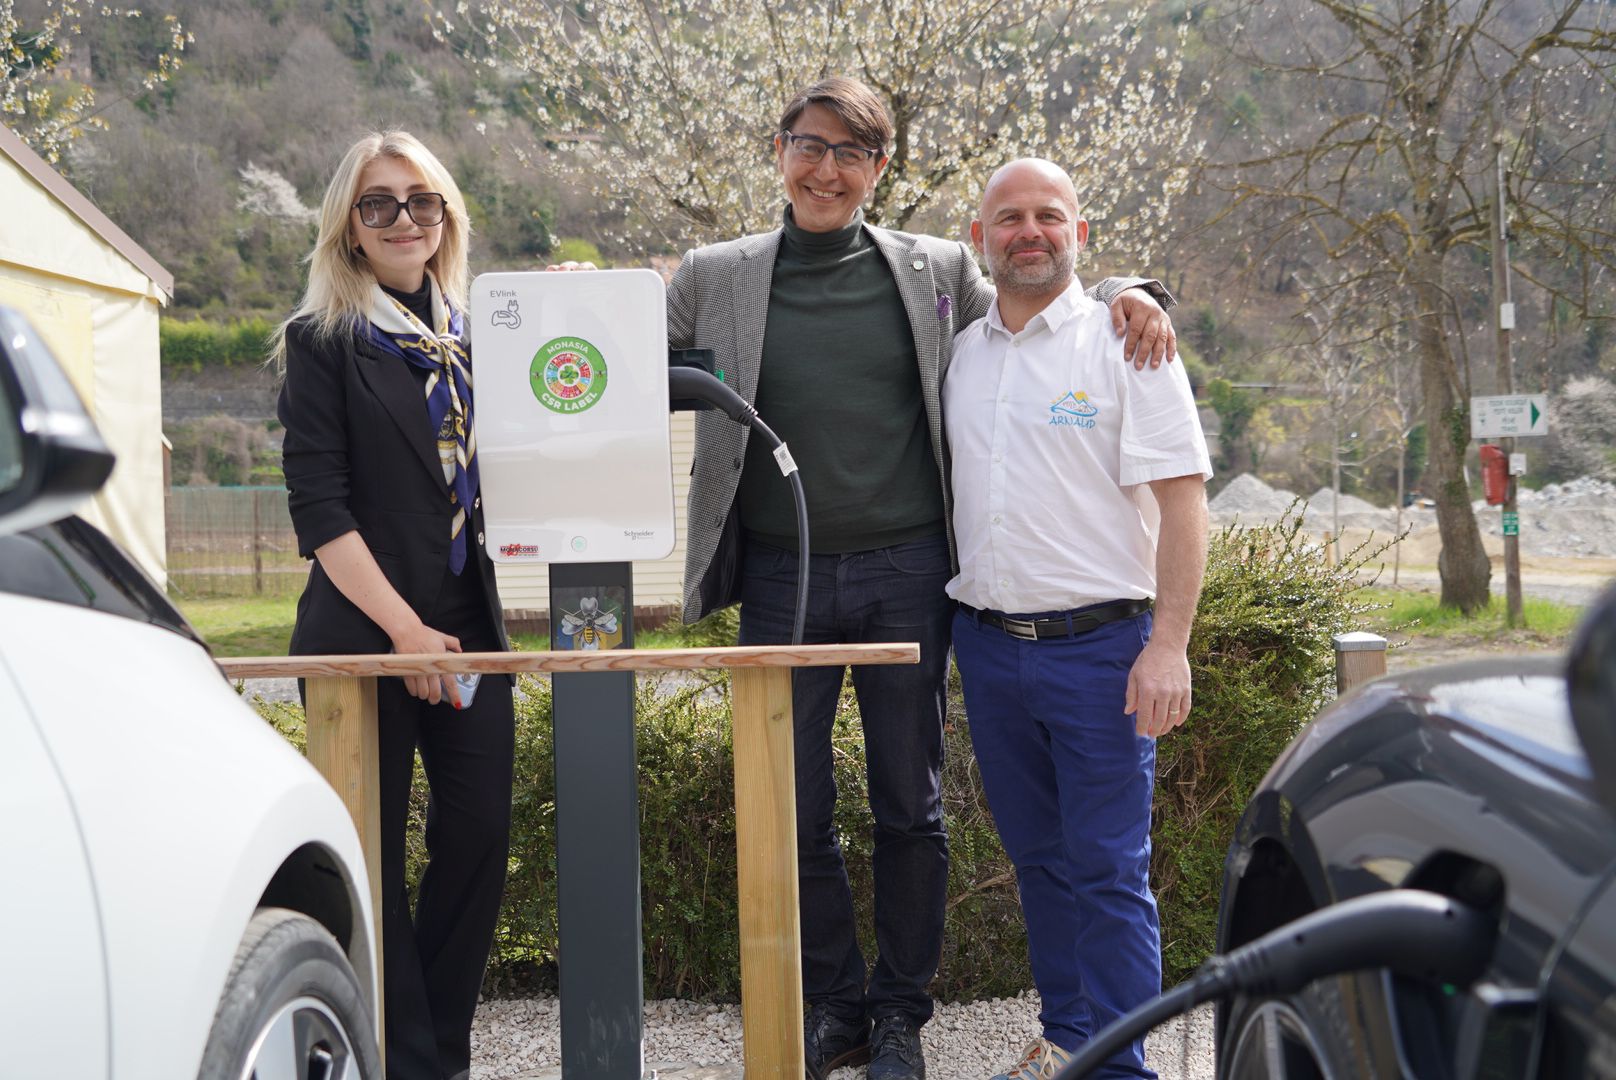 Power to the plug-ins celebrated at the Camping Les Templiers made possible by Lepton Charity Foundation with a media support of MonAsia Association image photo